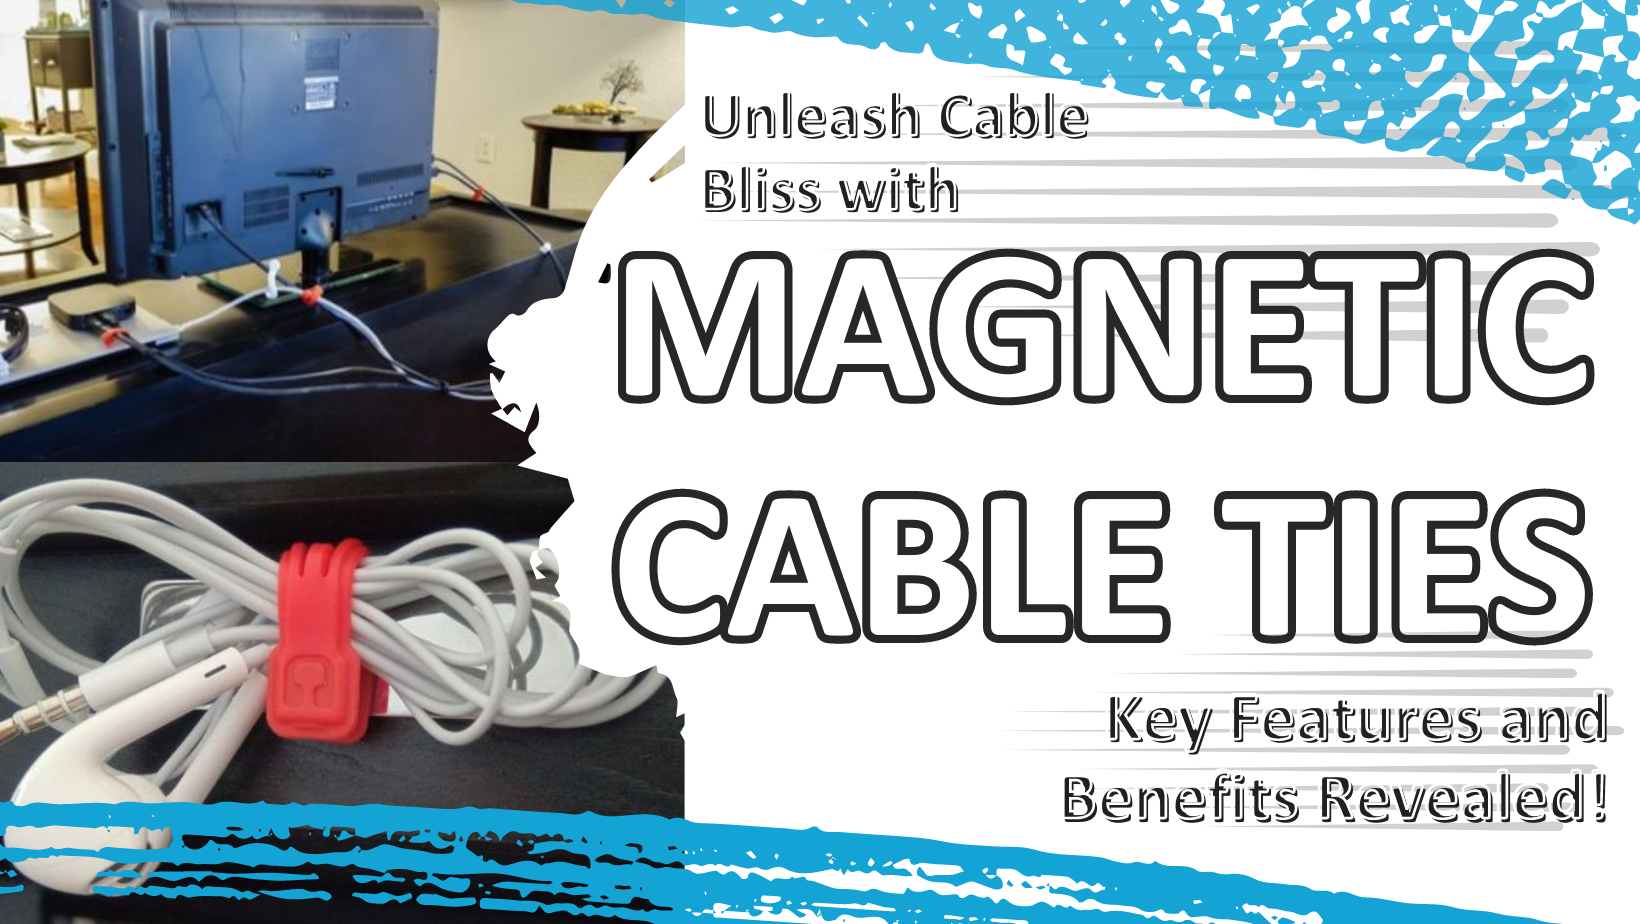 Unleash Cable Bliss with Magnetic Cable Ties: Key Features and Benefits Revealed!